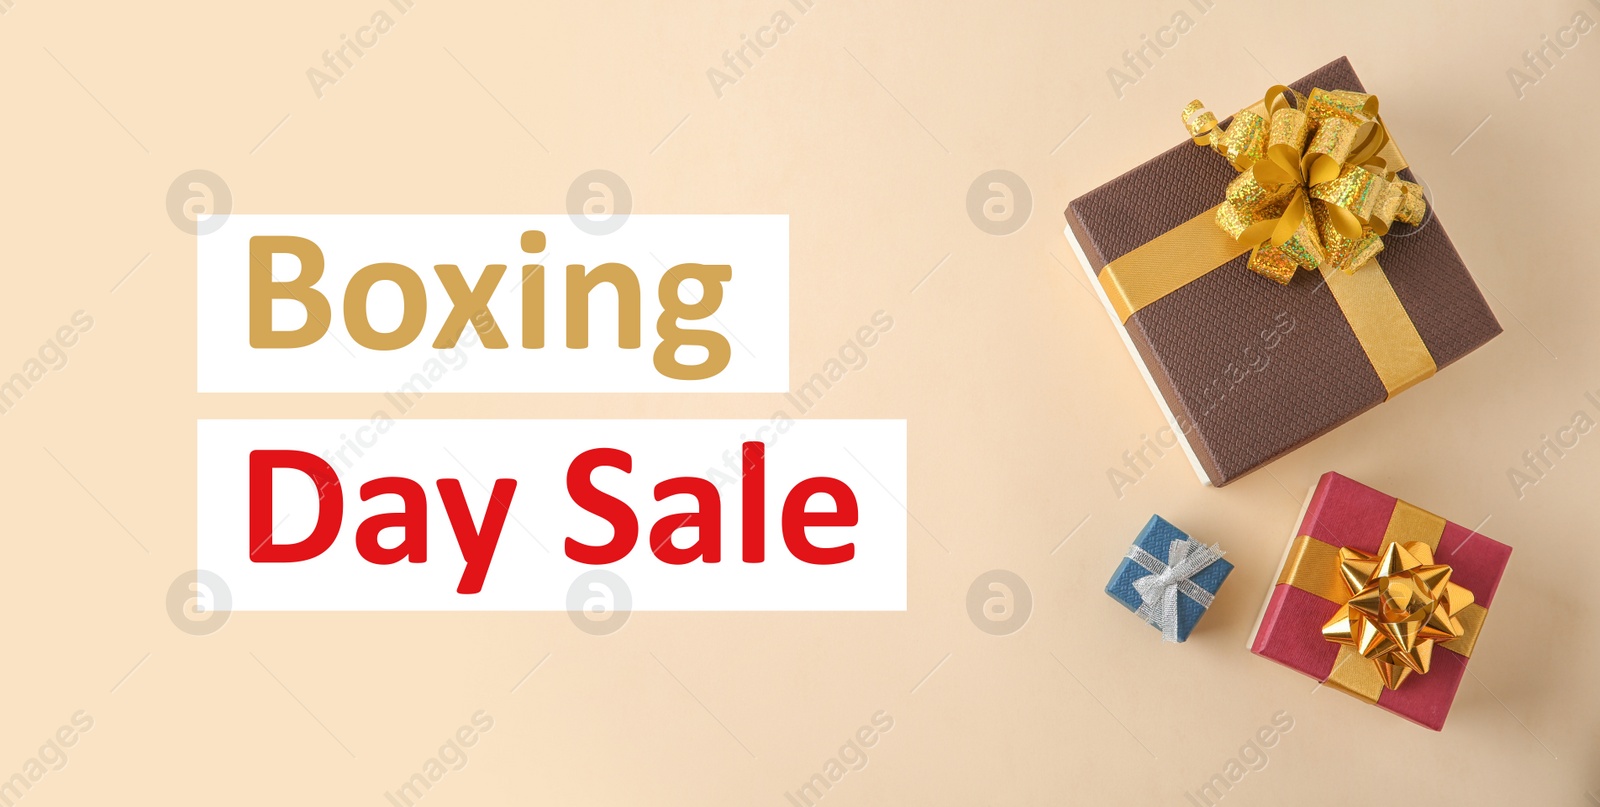 Image of Boxing day sale. Top view of gifts on light background, banner design